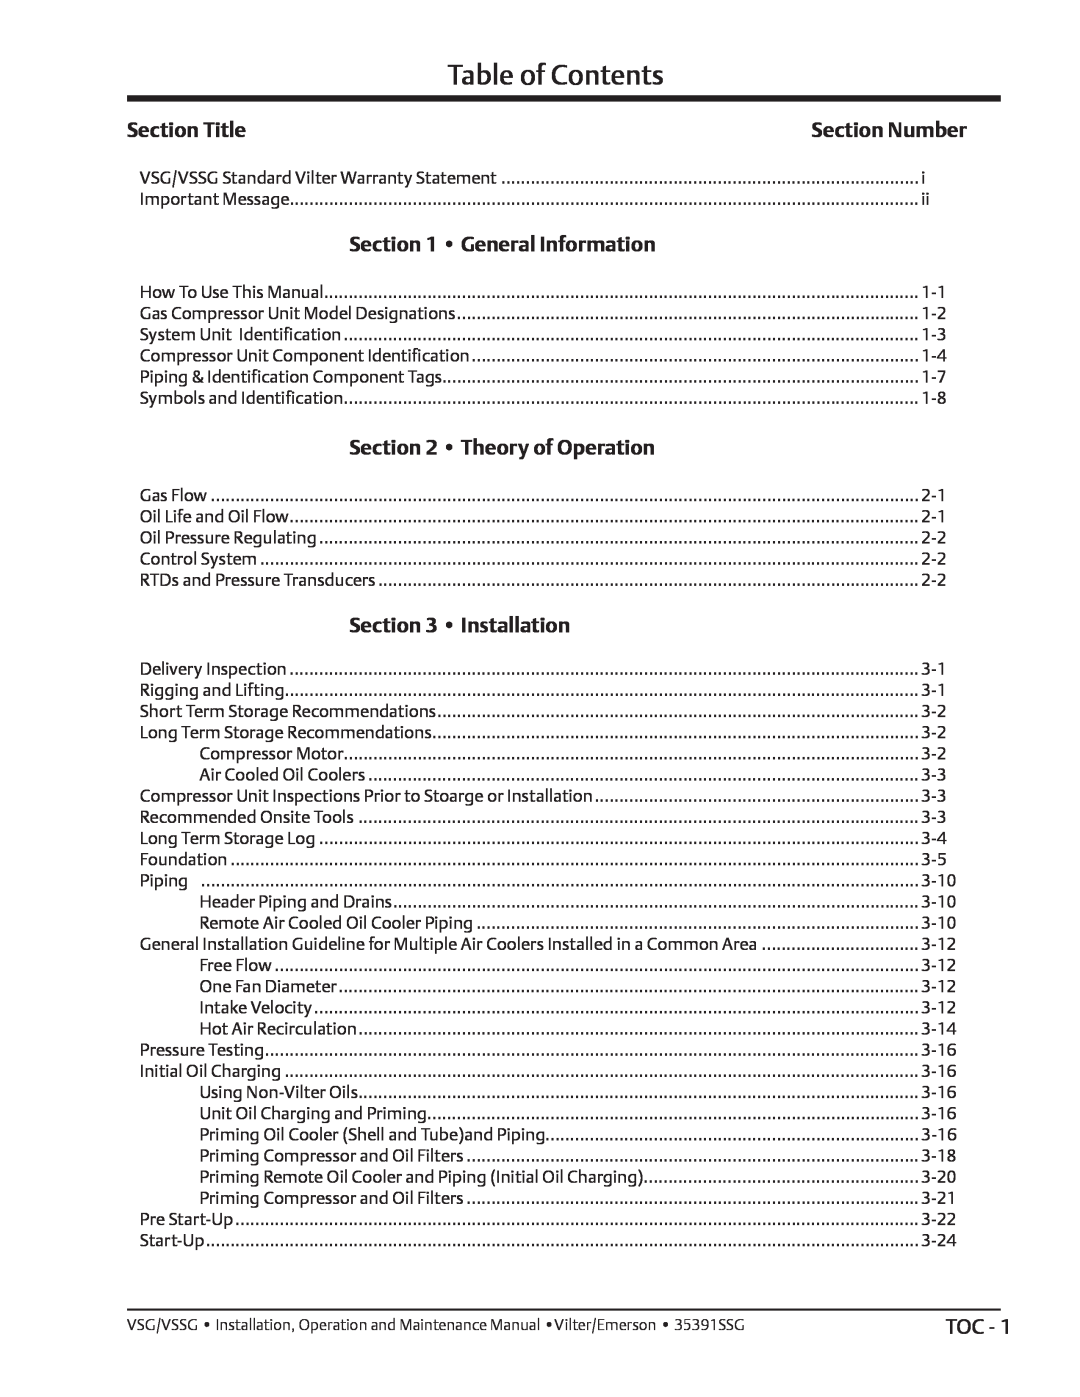 Emerson VSG, VSSG Table of Contents, Section Title, General Information, Theory of Operation, Installation, Section Number 